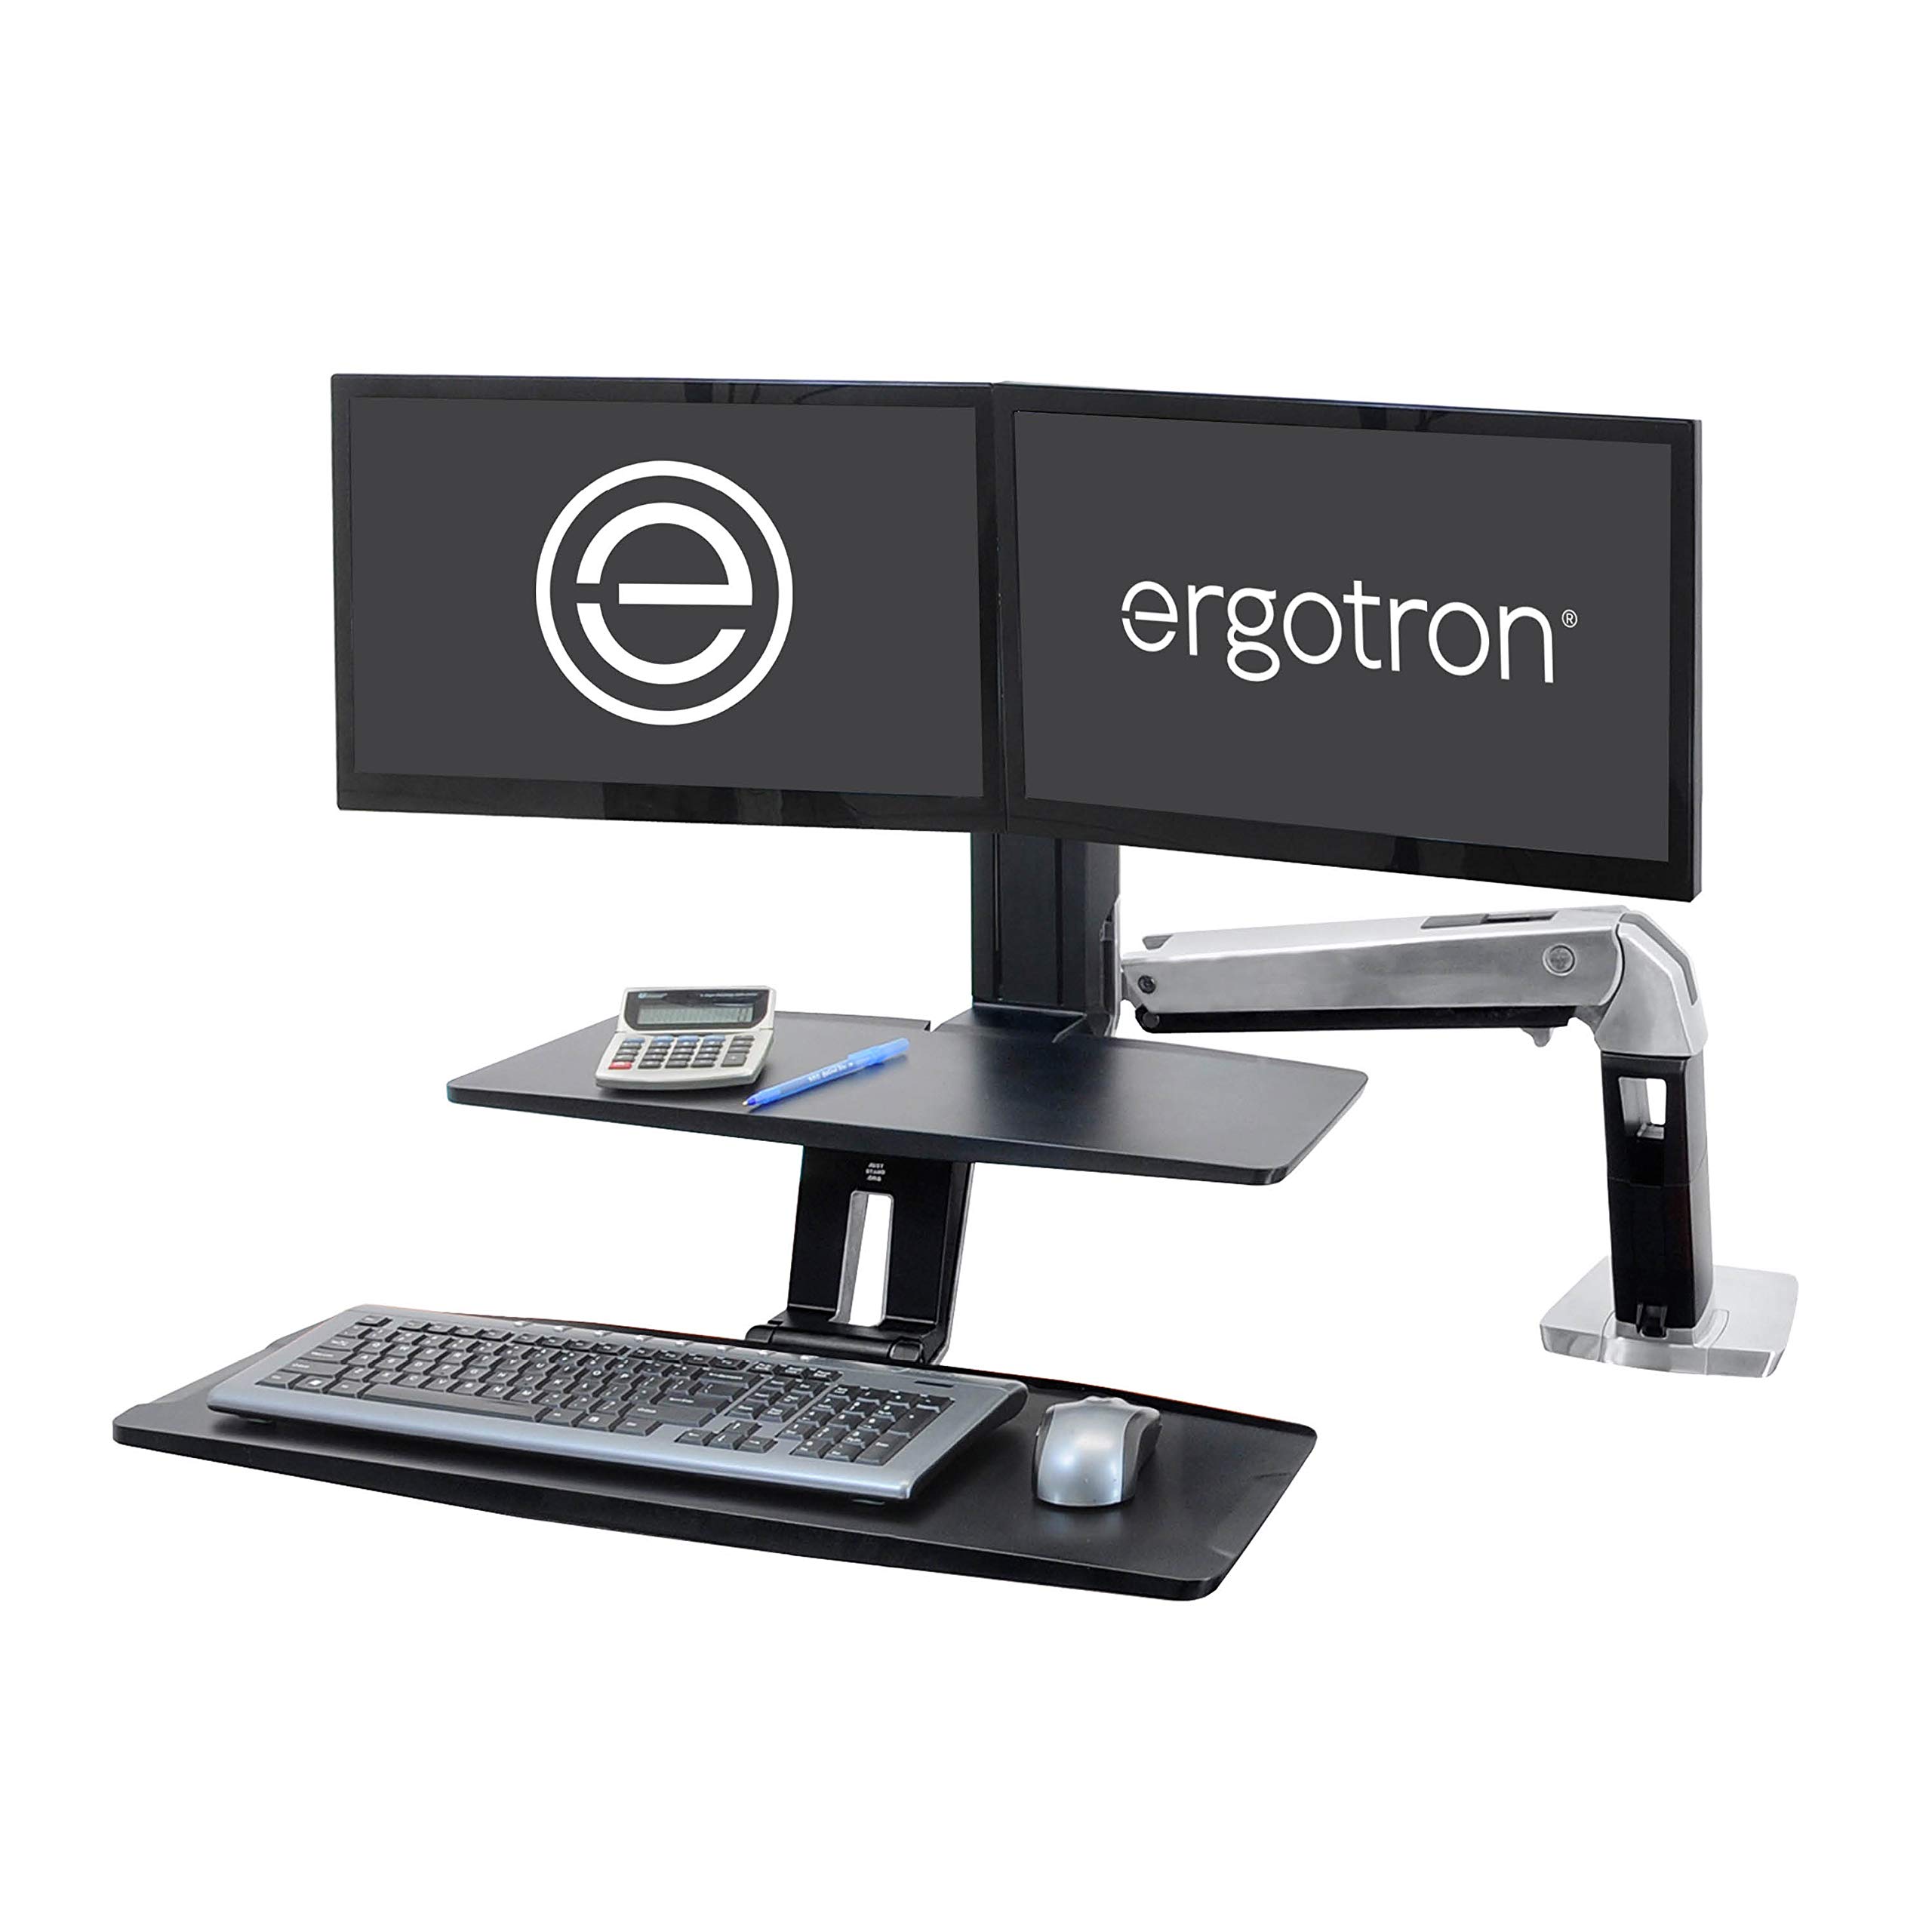 Ergotron - WorkFit-A Dual Workstation with Suspended Keyboard - for Tabletops – 22 Inches, Polished Aluminum